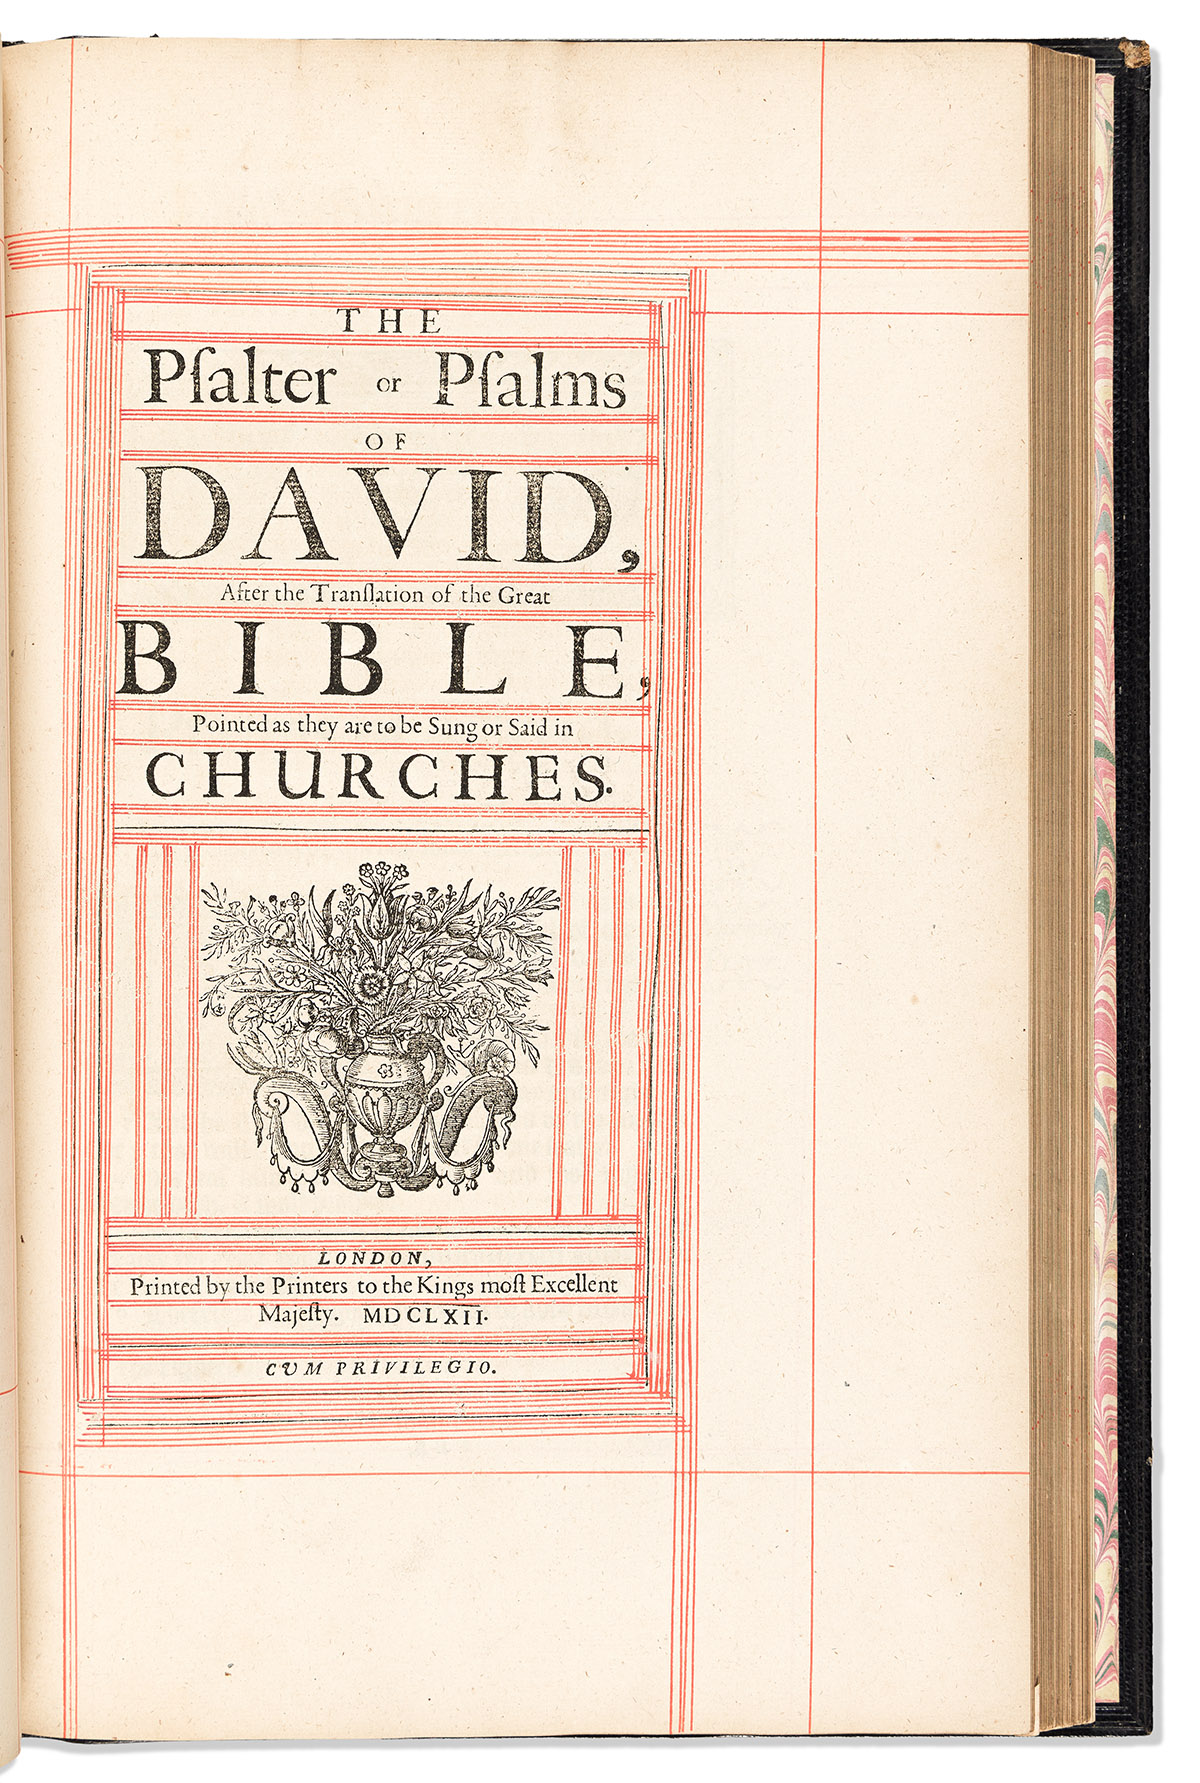 Church of England. The Book of Common Prayer; [bound with] The Psalter or Psalms of David.